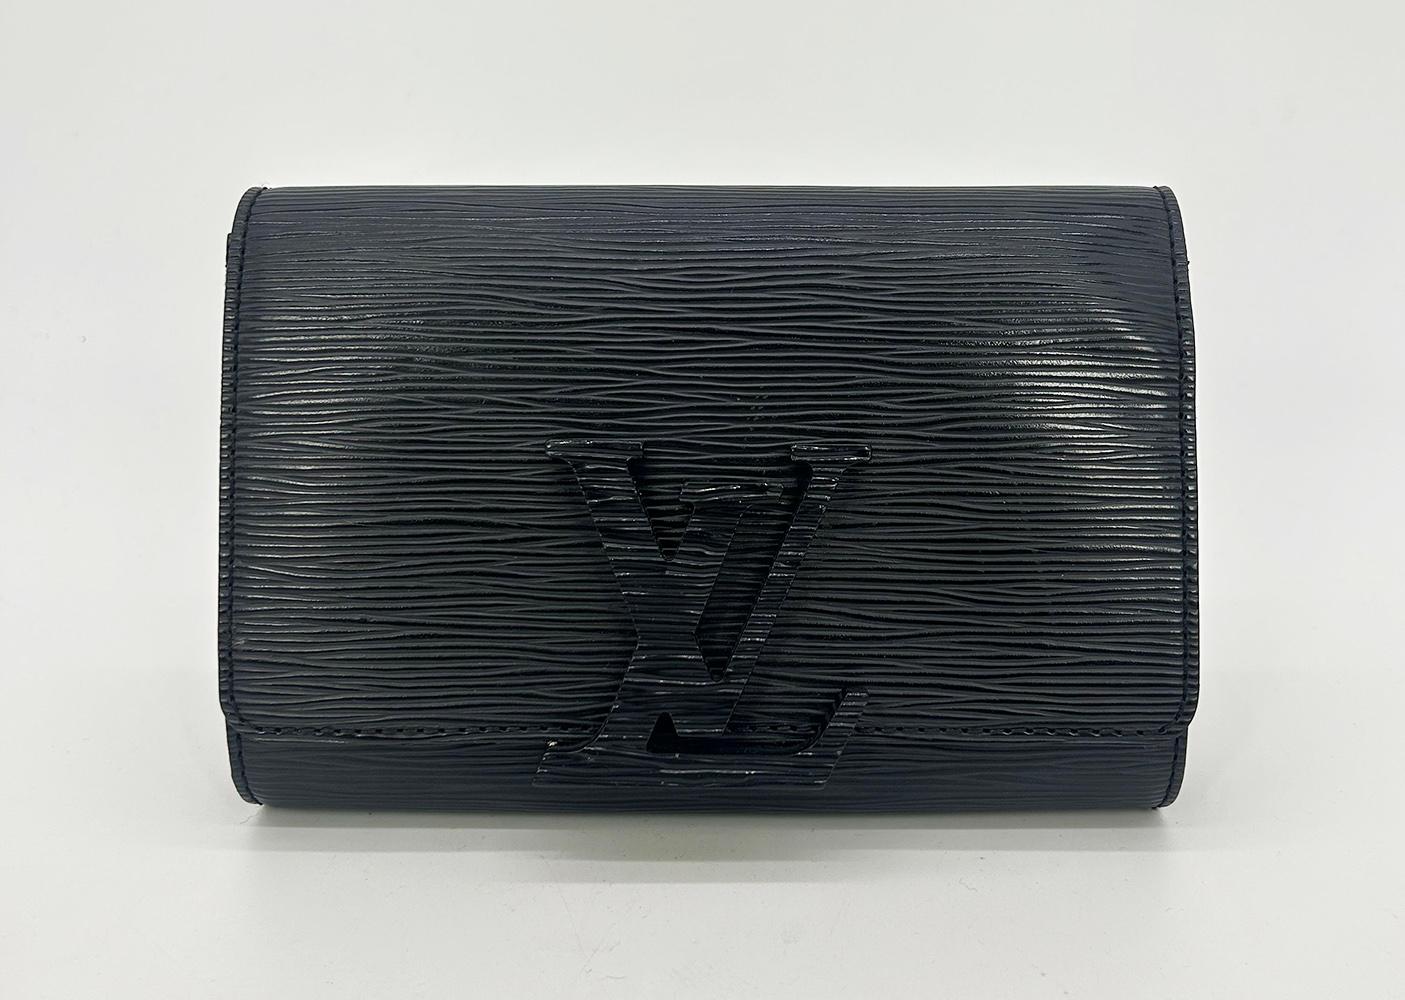 Louis Vuitton Louise Strap PM bag in good condition. Black electric noir epi leather exterior trimmed with silver hardware and mattching black epi LV logo centered hardware. Lift latch closure opens to a black suede interior with 2 slit and 1 zipped